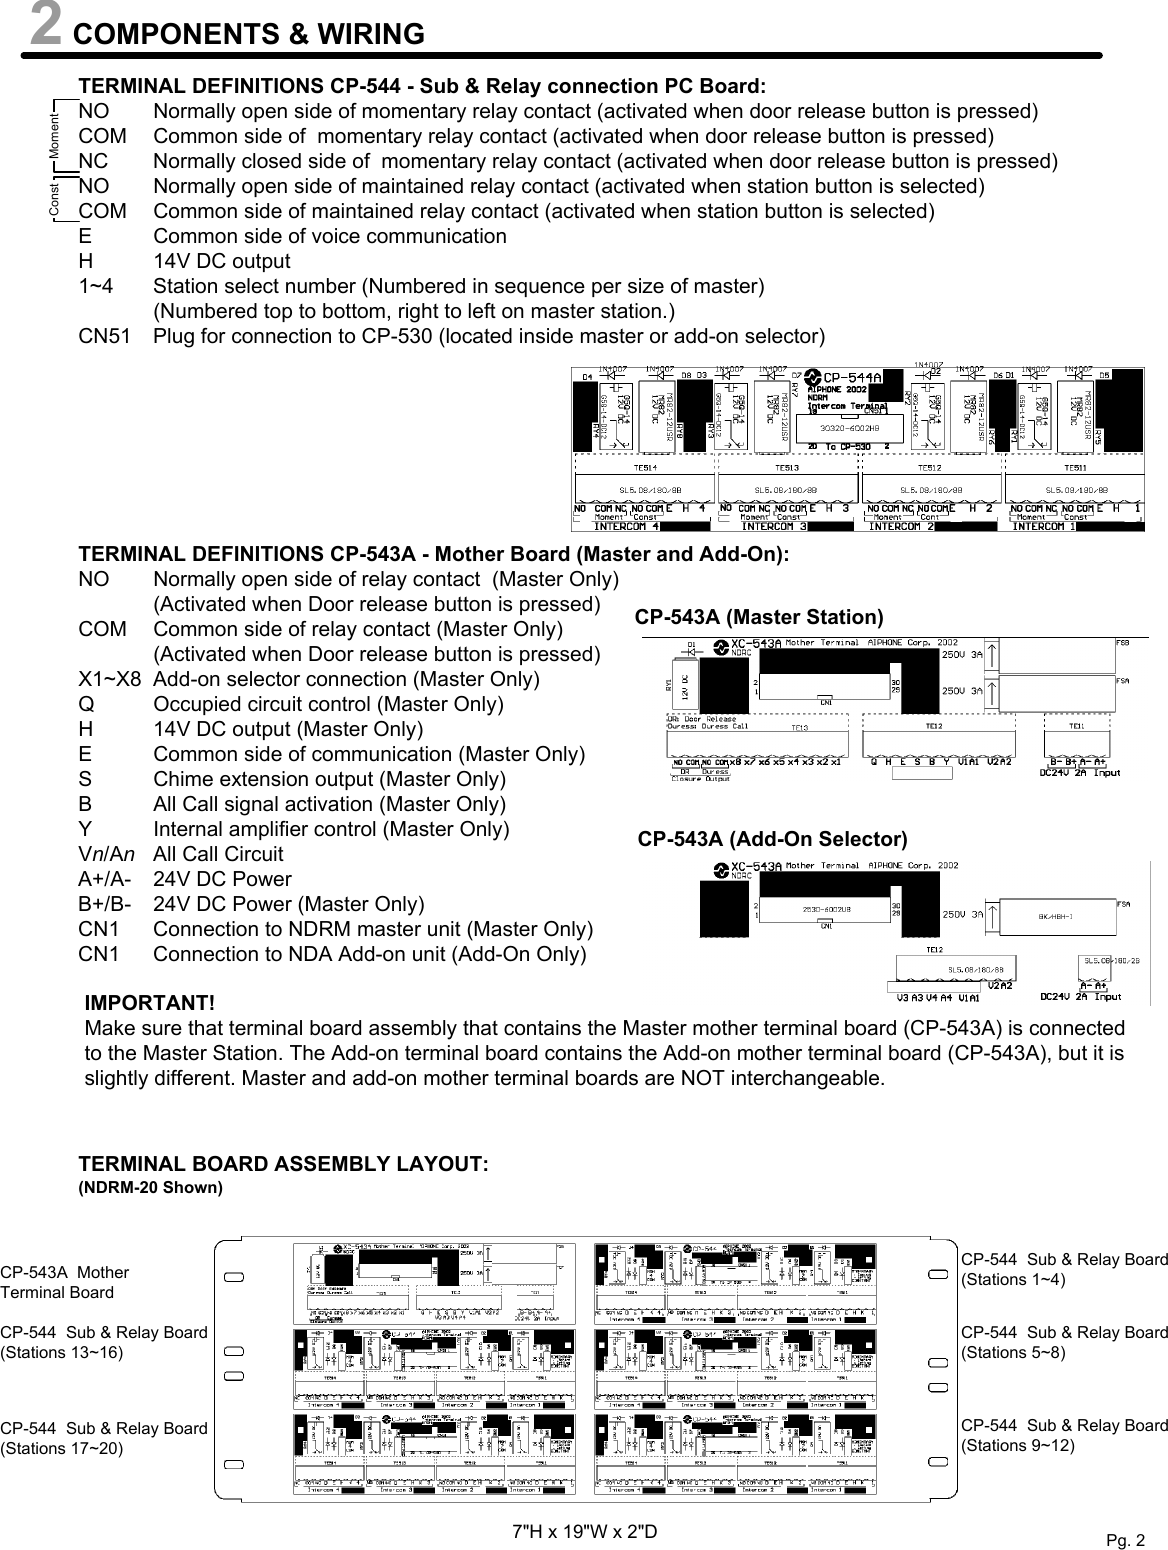 Page 2 of 9 - Aiphone Aiphone-Ndrm-Users-Manual- Visio-NDRM Instructions  Aiphone-ndrm-users-manual